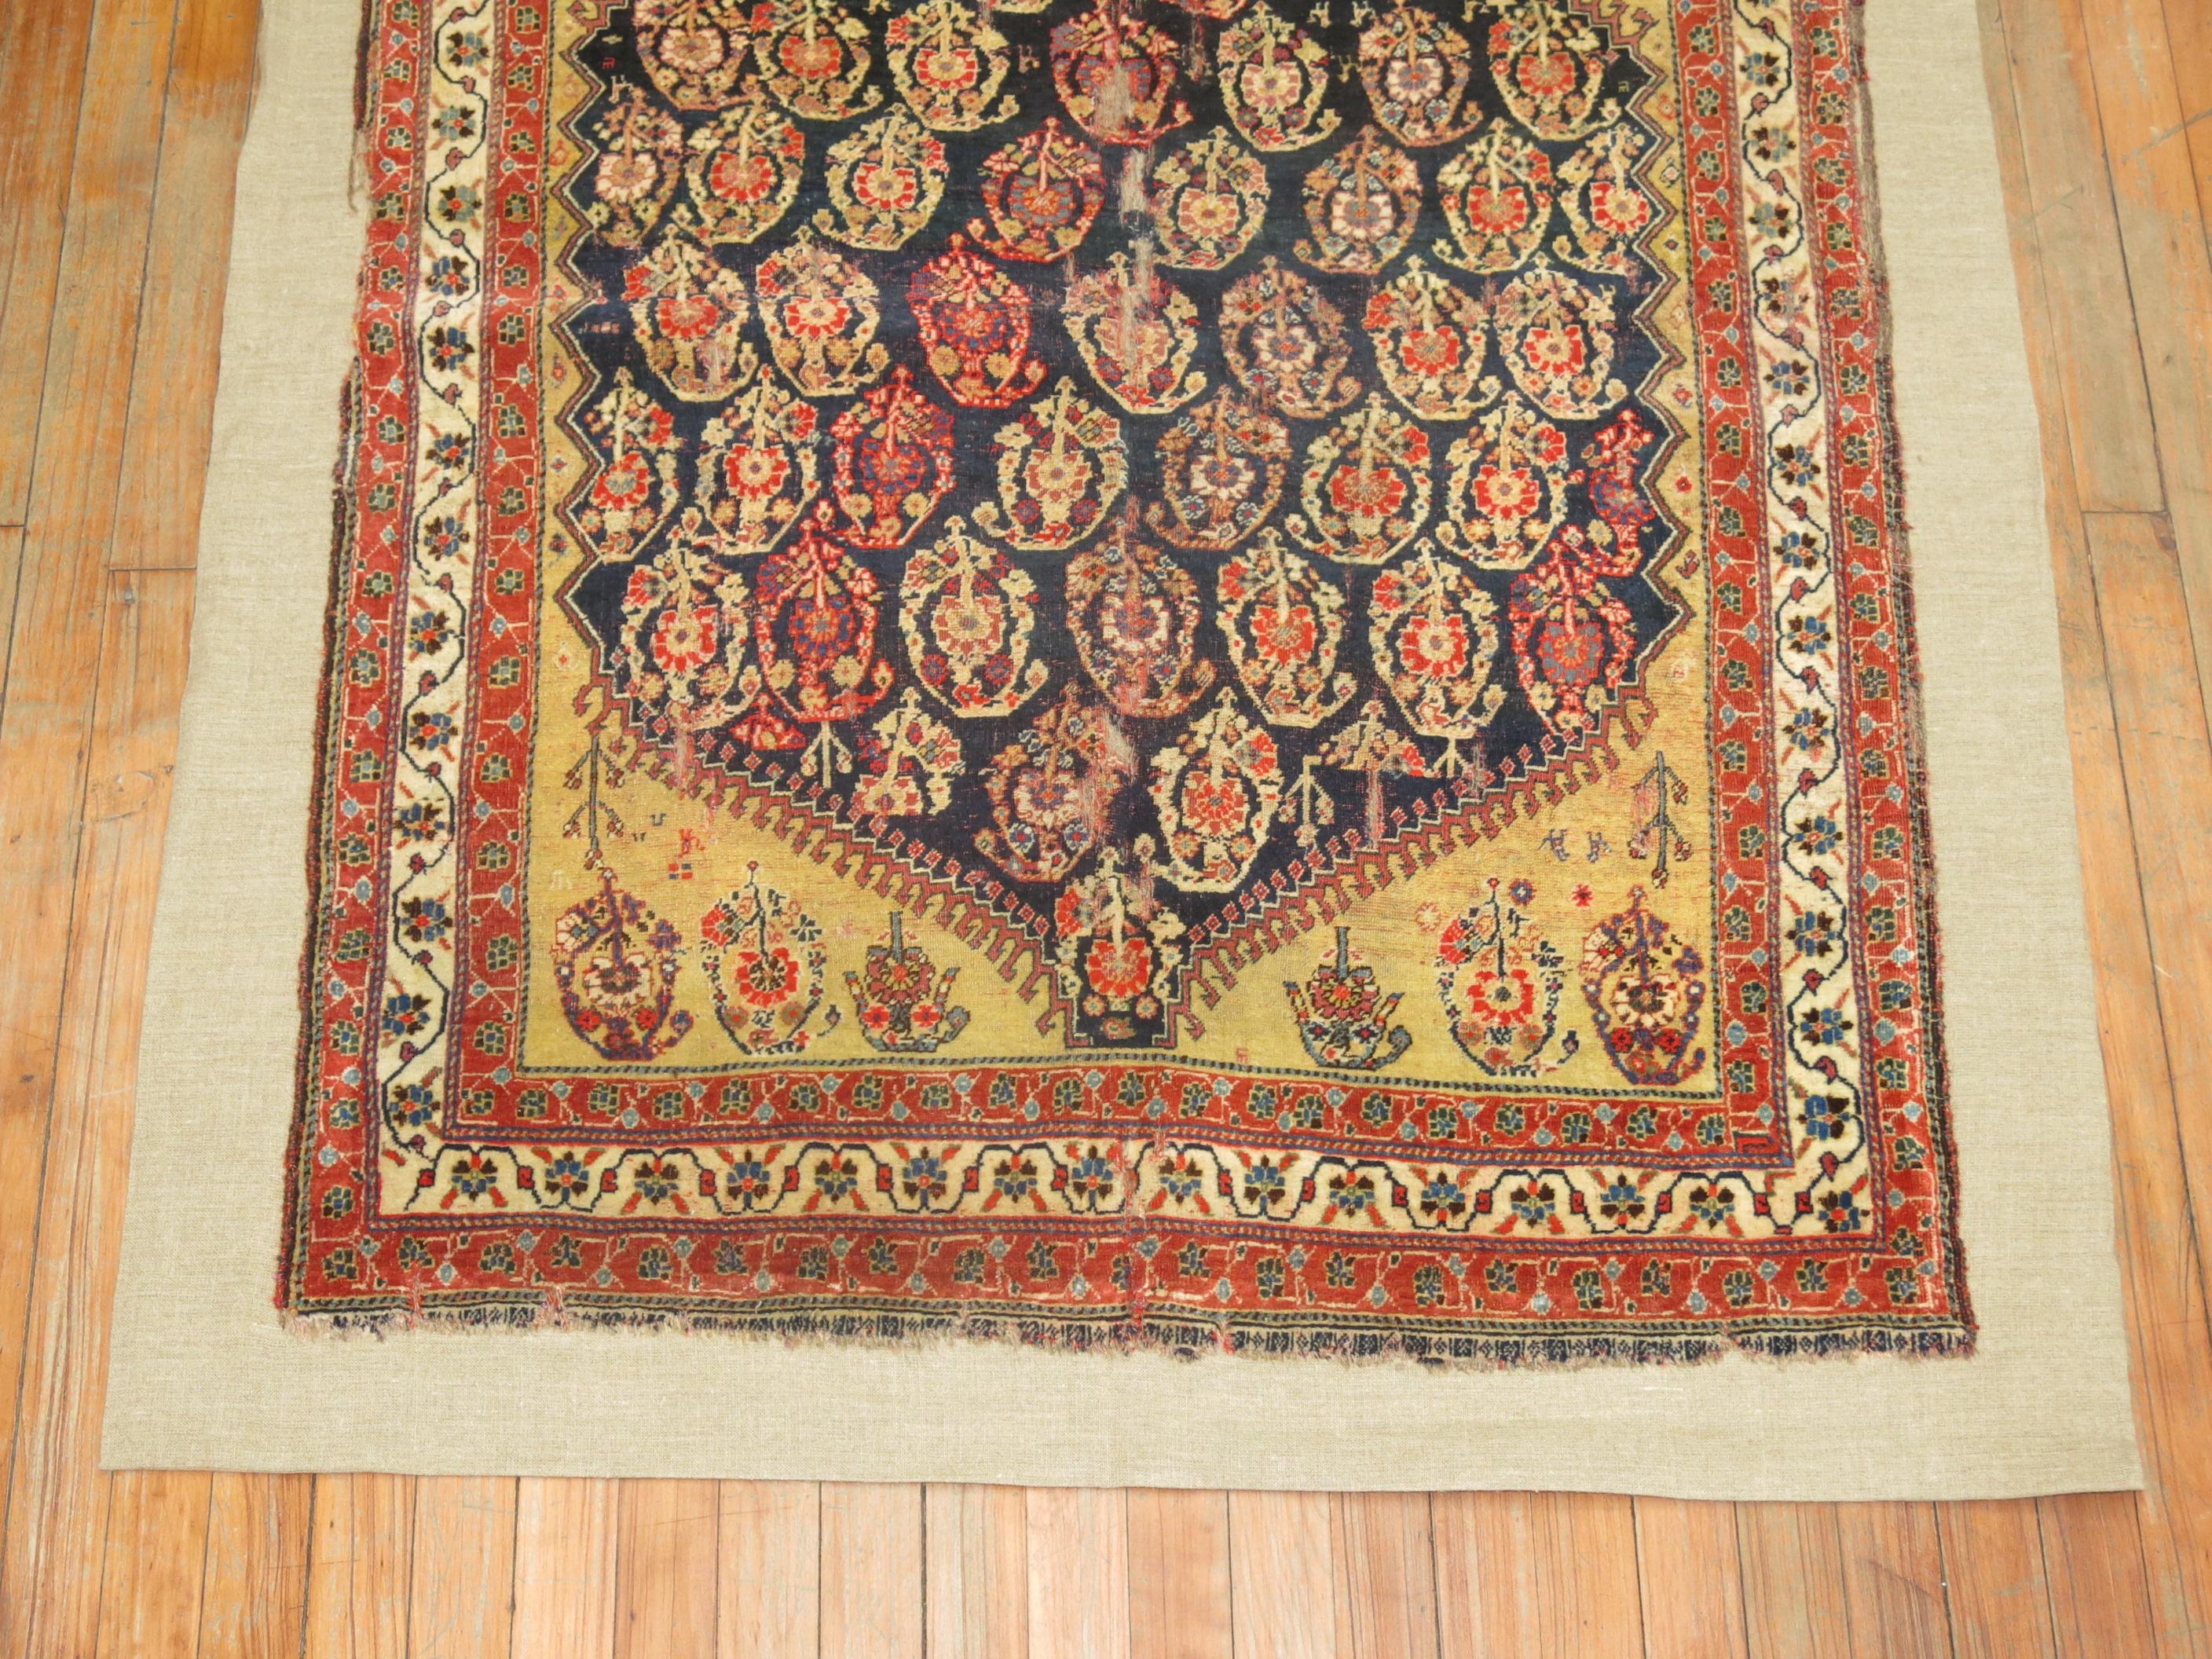 An early 19th century Tribal Persian Qashqai rug stitched onto a canvas like Linen. This item can either be used as a wall piece or floor covering. It can be walked on if desired.

3'6'' x 5'8''